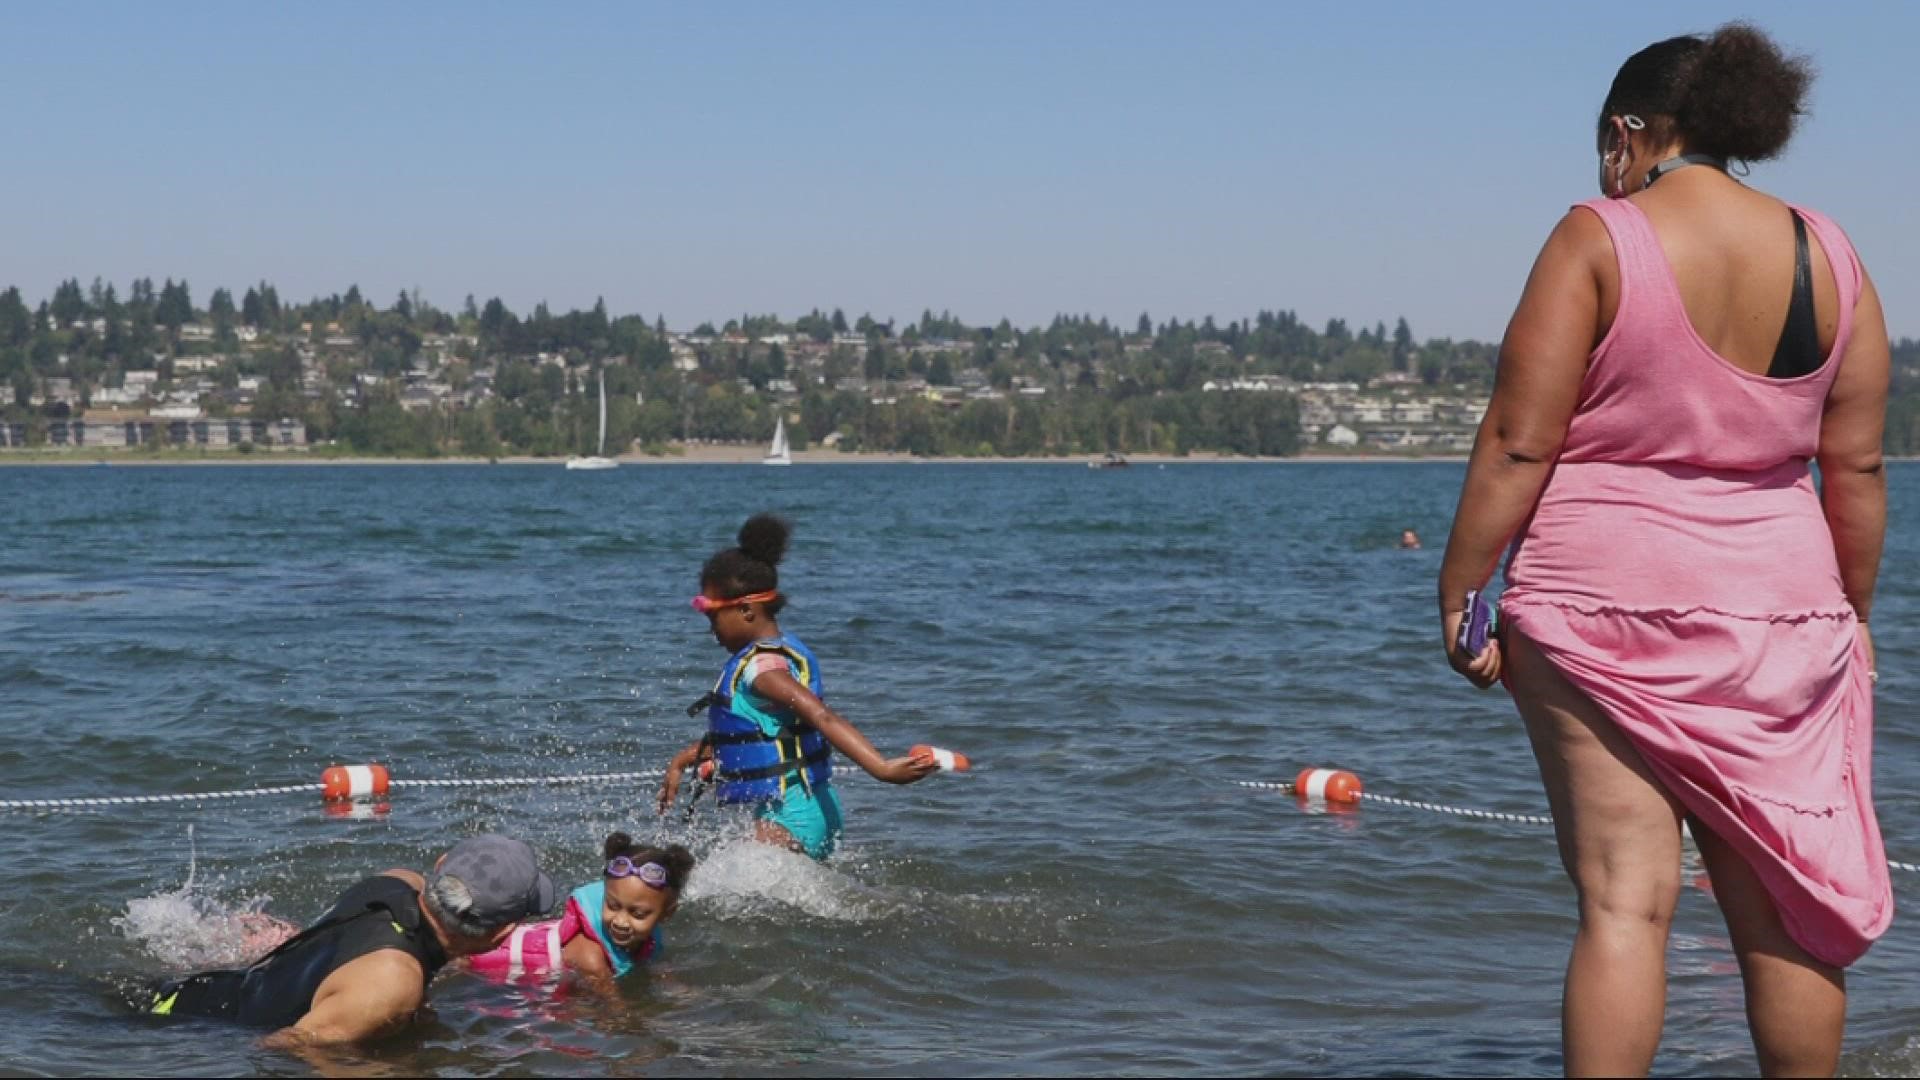 The Black Swimming Initiative is putting on a free swimming camp on July 30. The event aims to teach BIPOC kids how to swim.